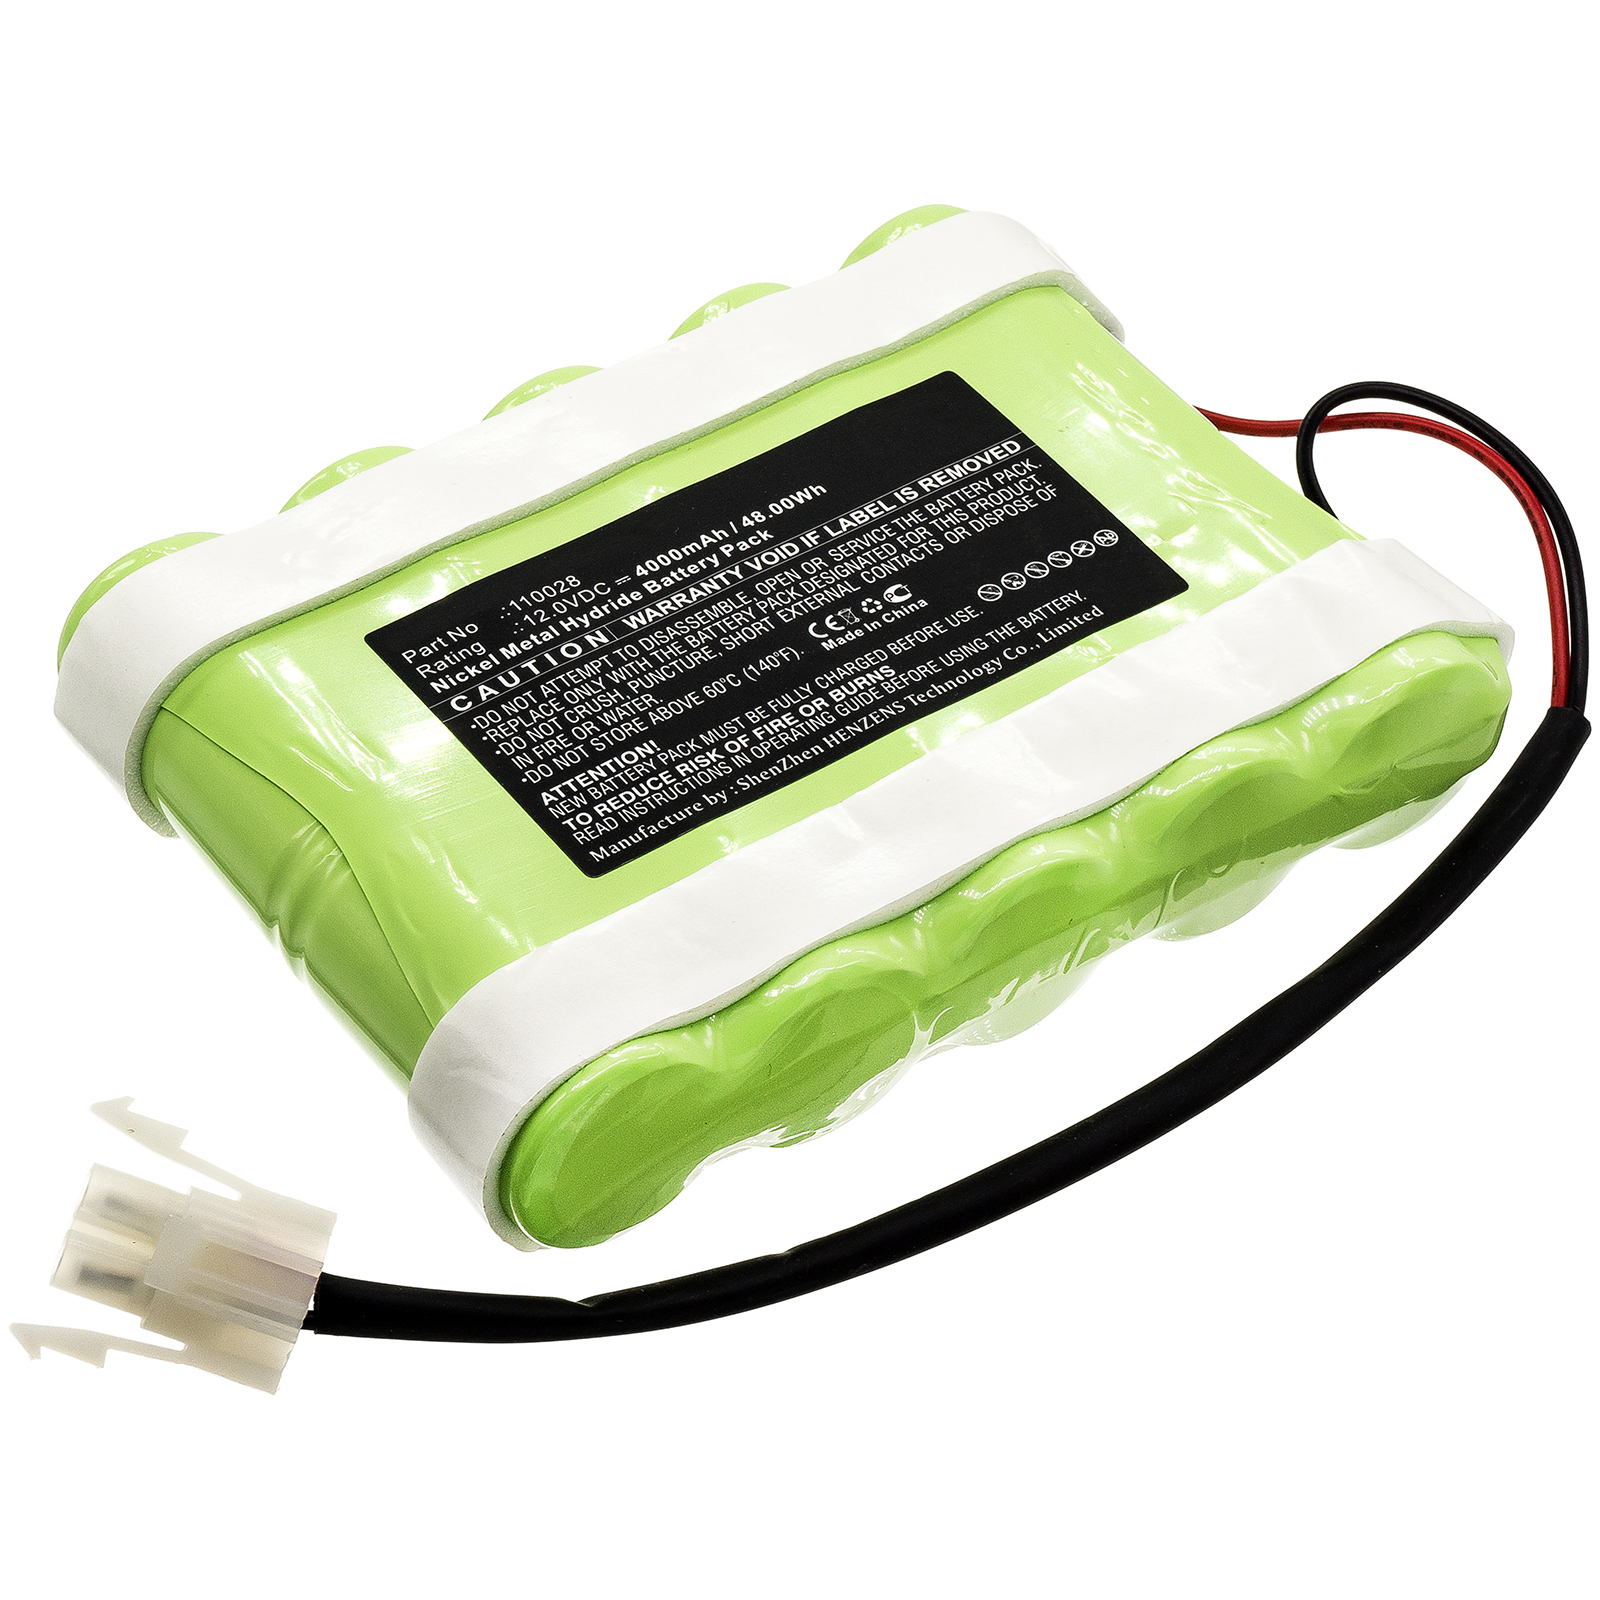 Synergy Digital Medical Battery, Compatible with Hellige 110028 Medical Battery (12V, Ni-MH, 4000mAh)